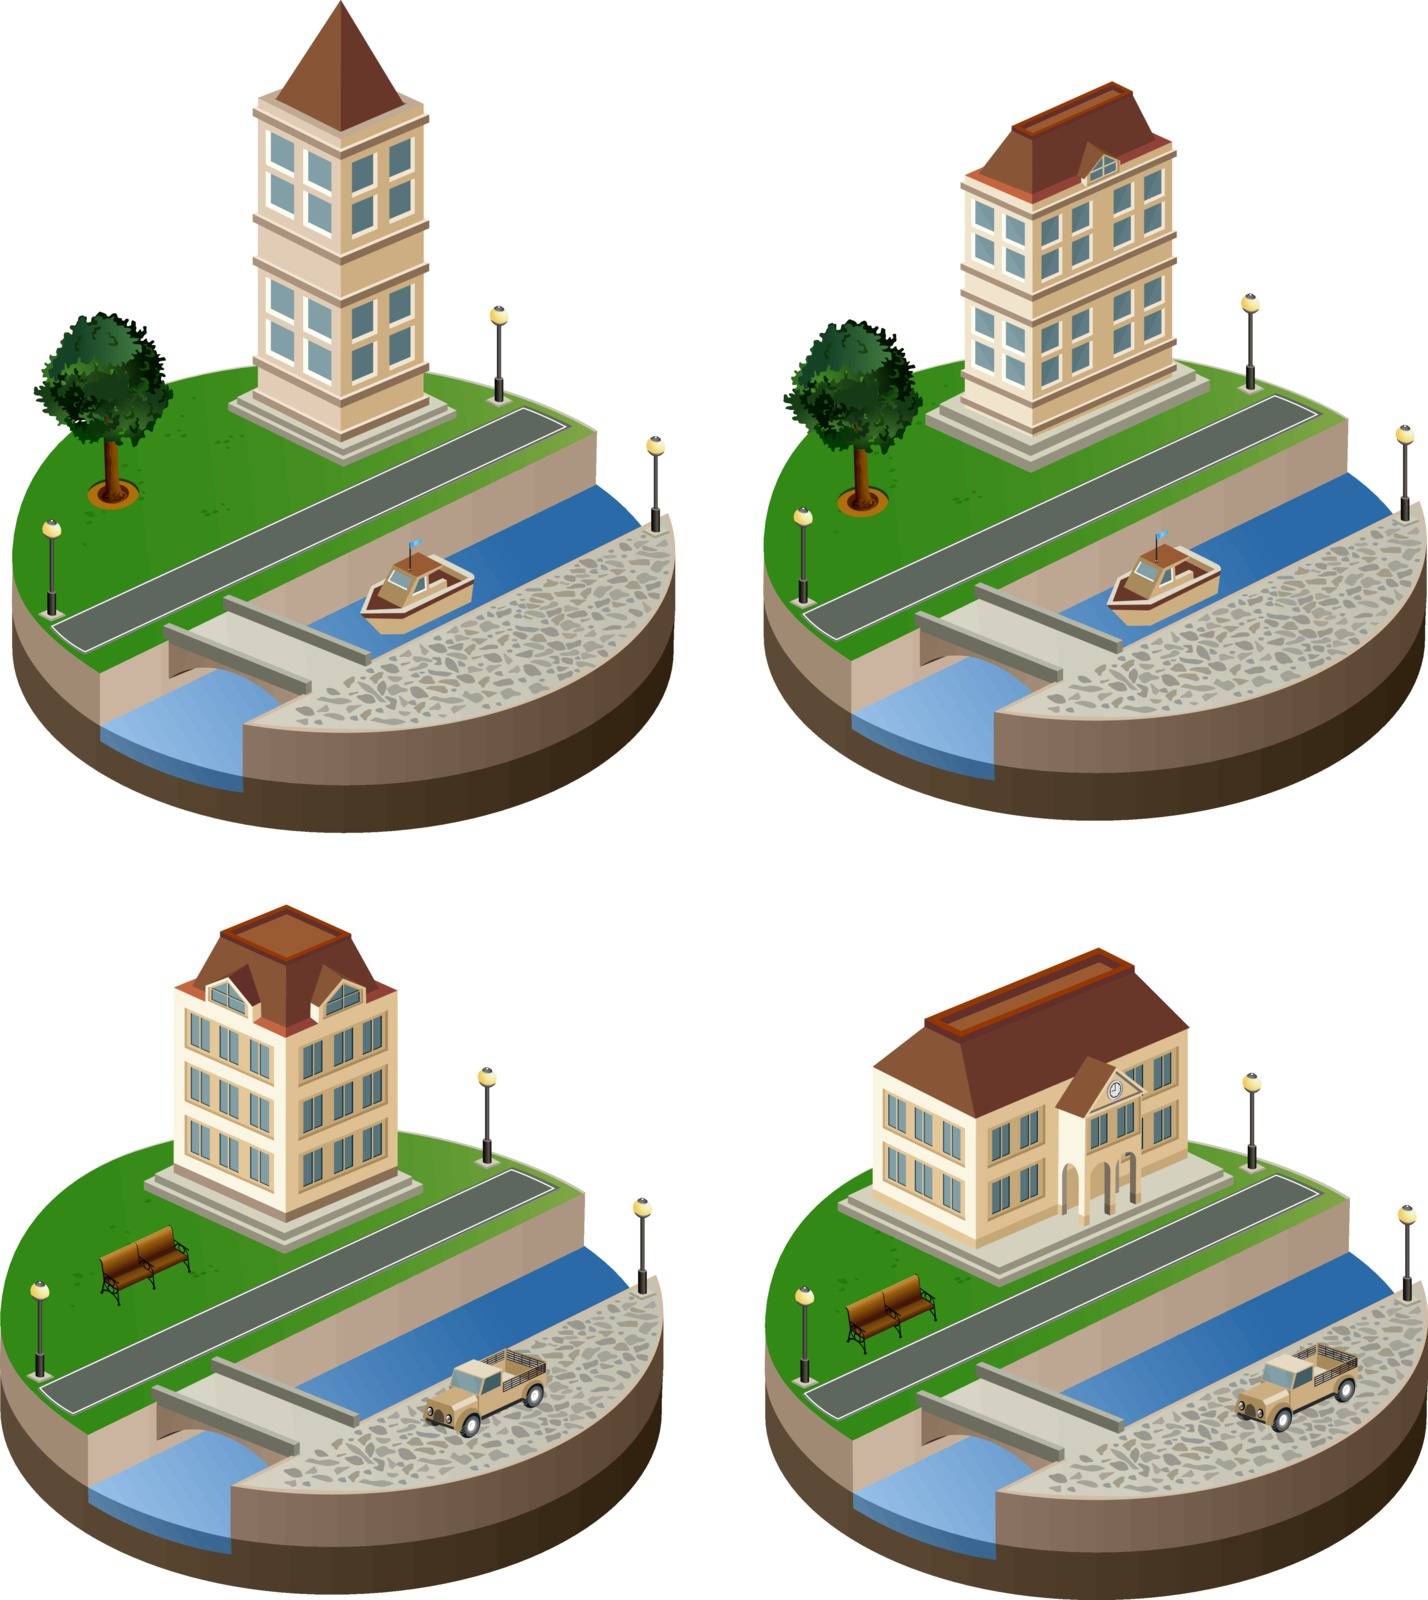 Set of vector elements of the urban landscape of isometric